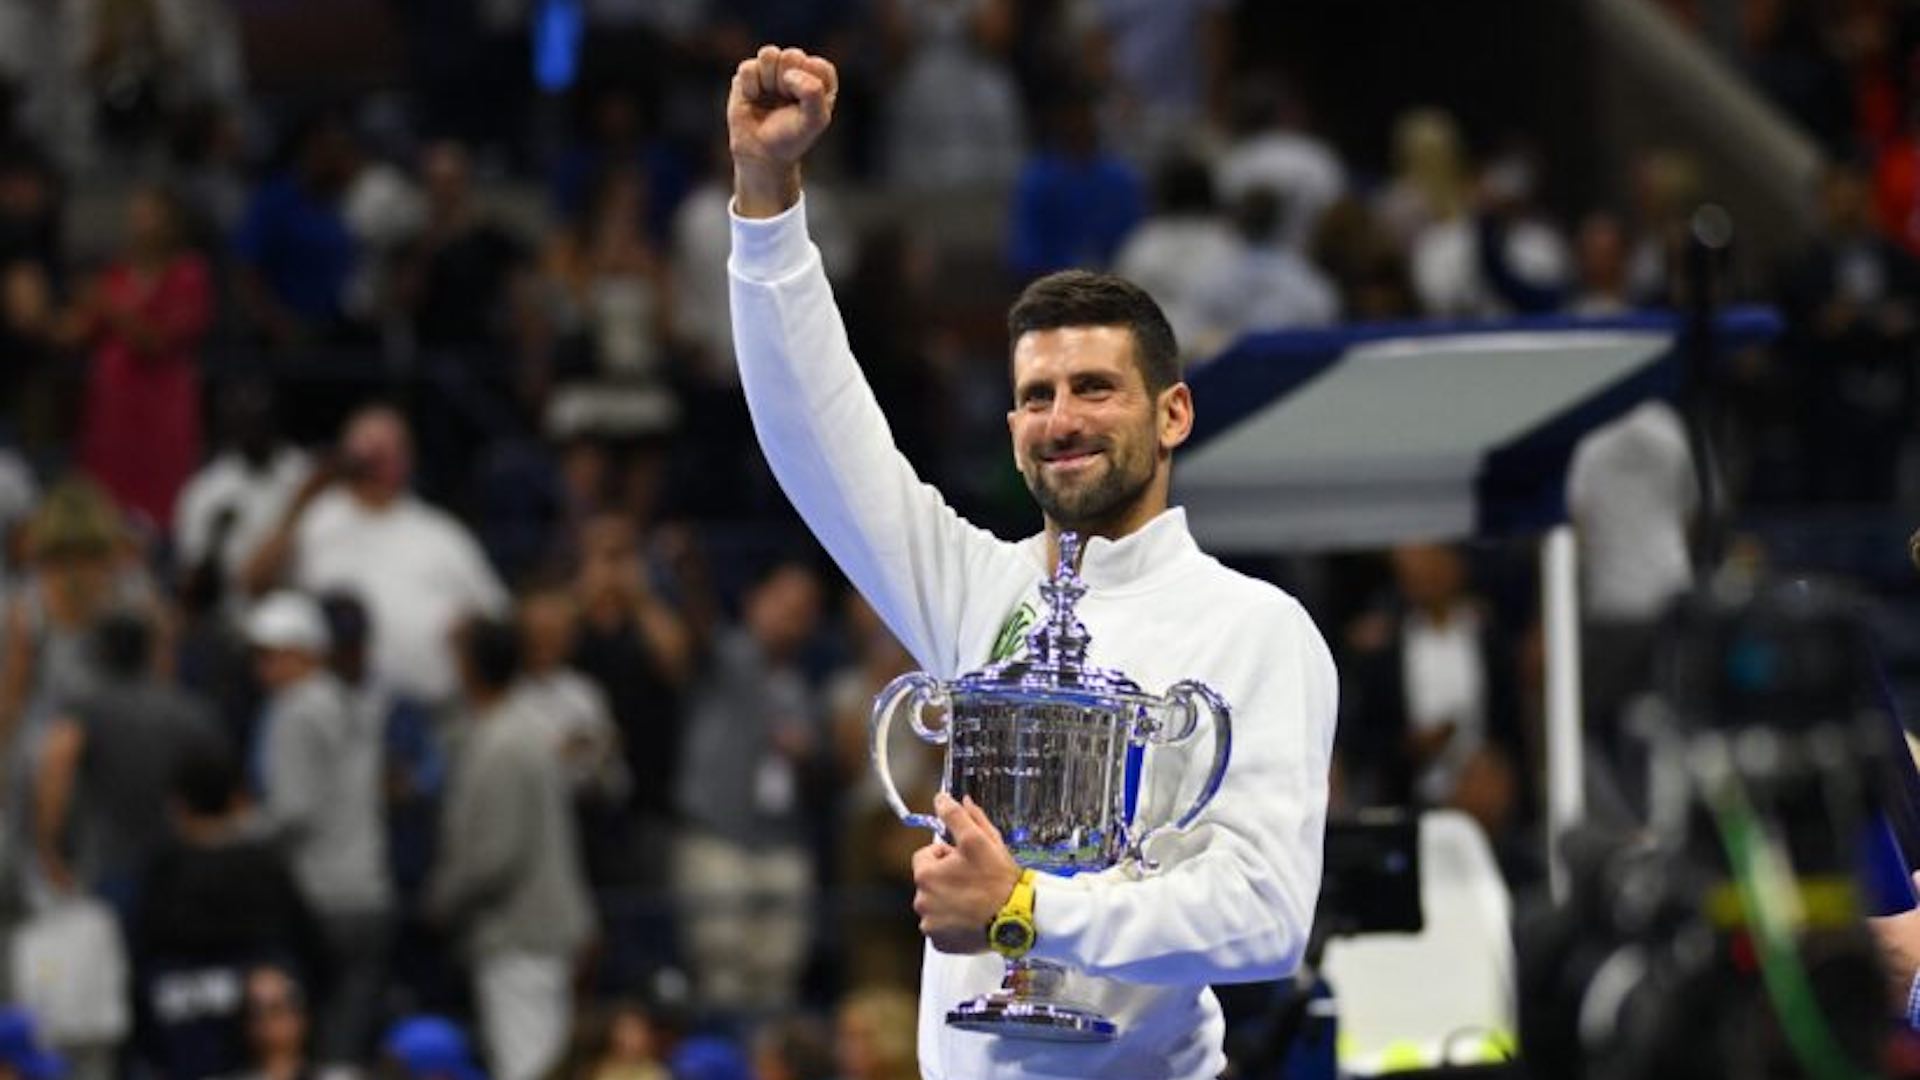 Djokovic triumphs over Rune, secures record eighth year-end No. 1 ranking